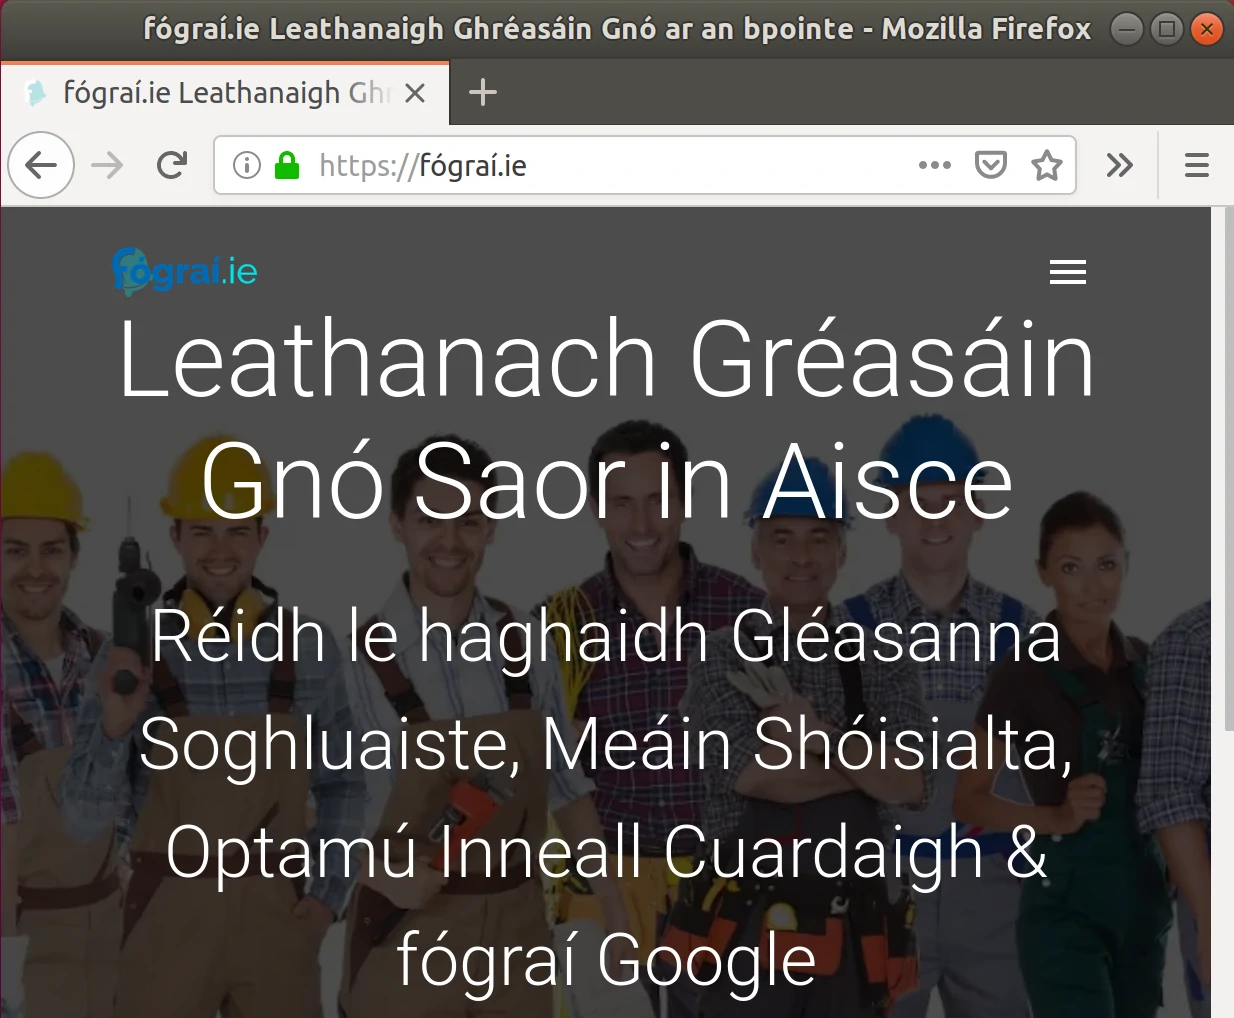 Screencap of the landing page of fógraí.ie in the Firefox web browser and fógraí.ie displayed correctly in the browser wed address field.